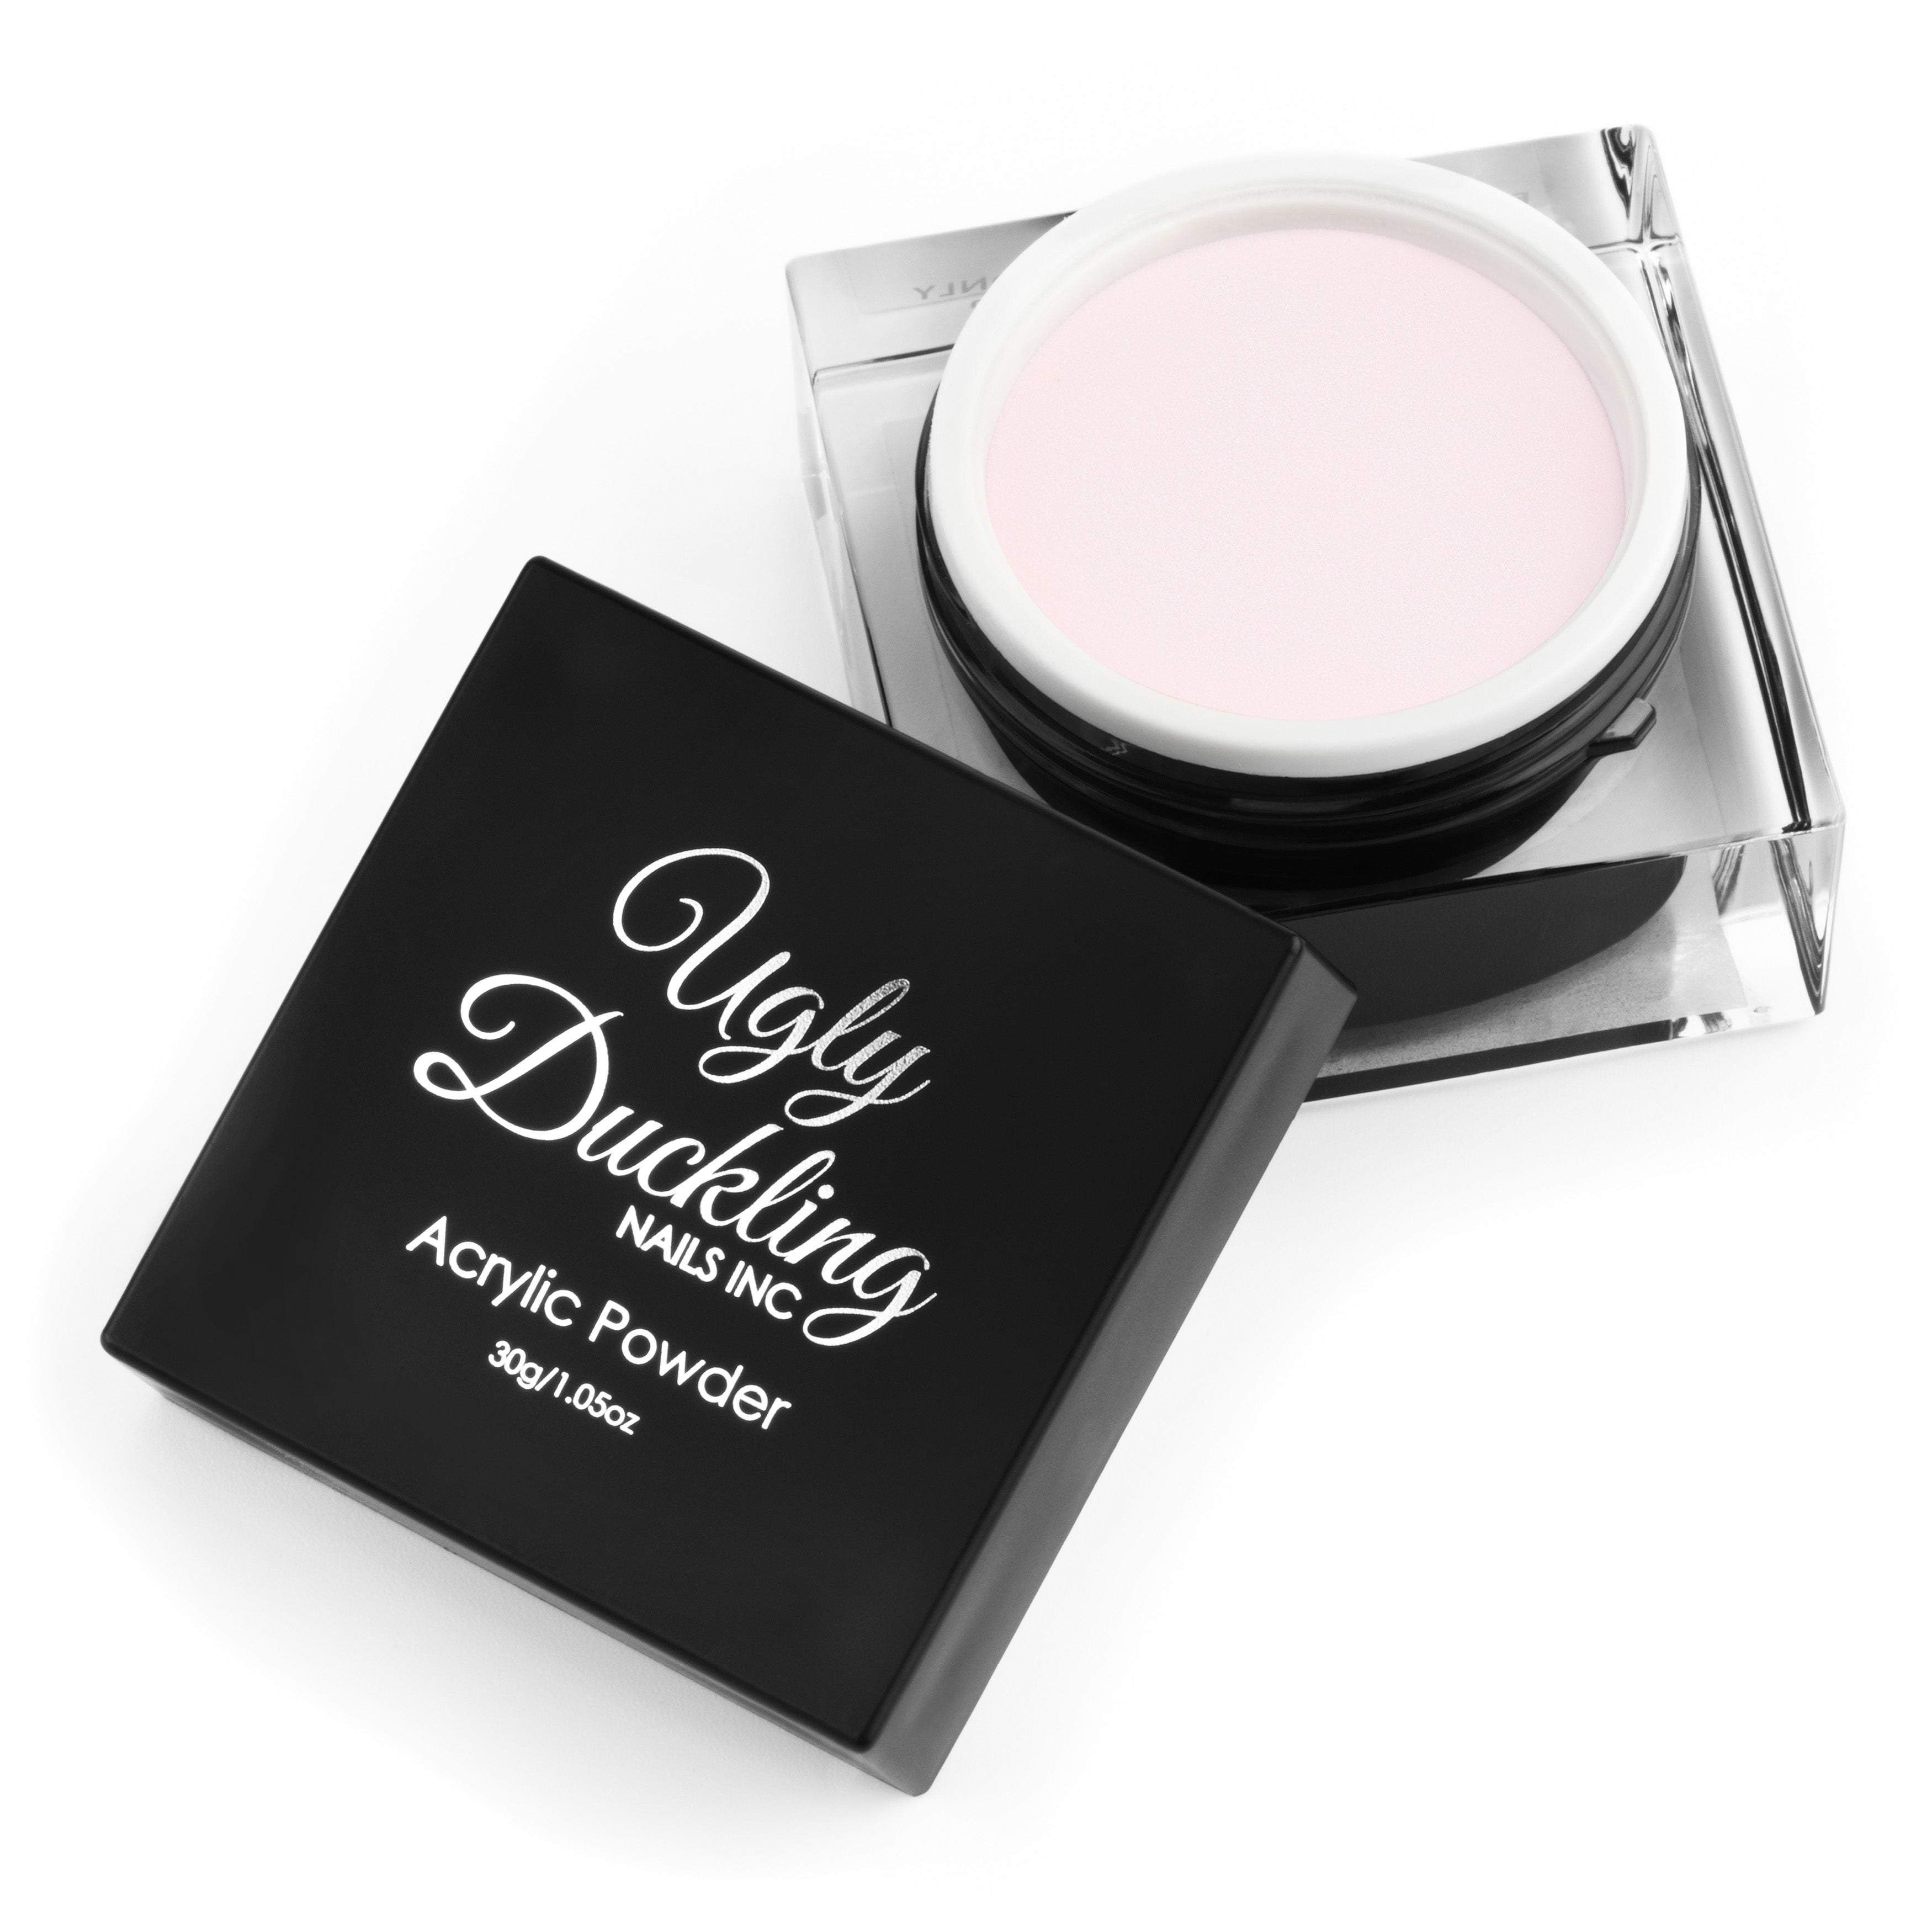 Ugly Duckling Acrylic - Premium Powder (Milky Pink) - Creata Beauty - Professional Beauty Products